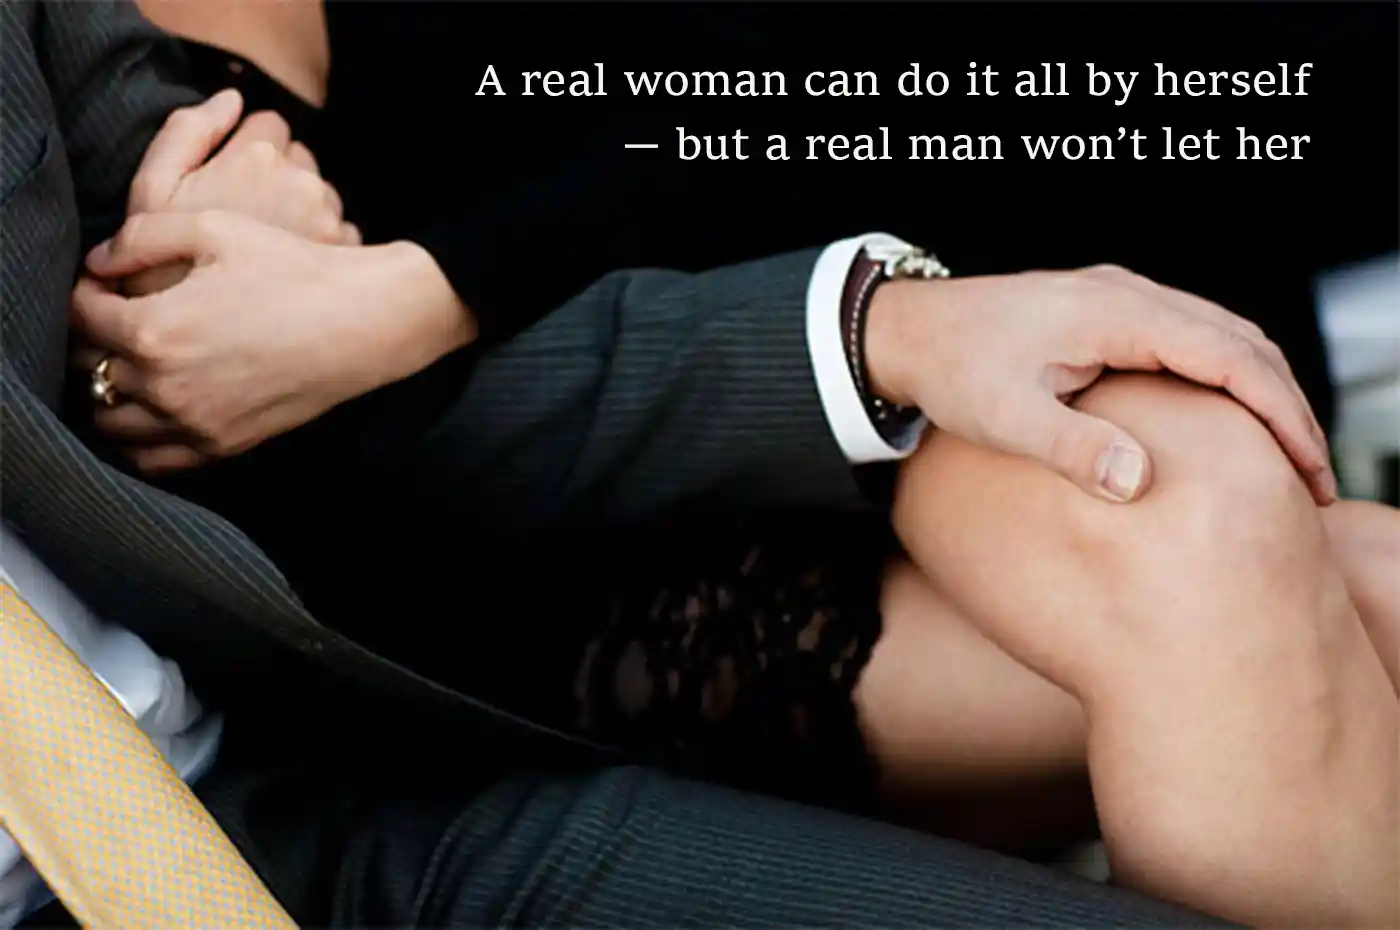 A real woman can do it all by herself - but a real man won't let her